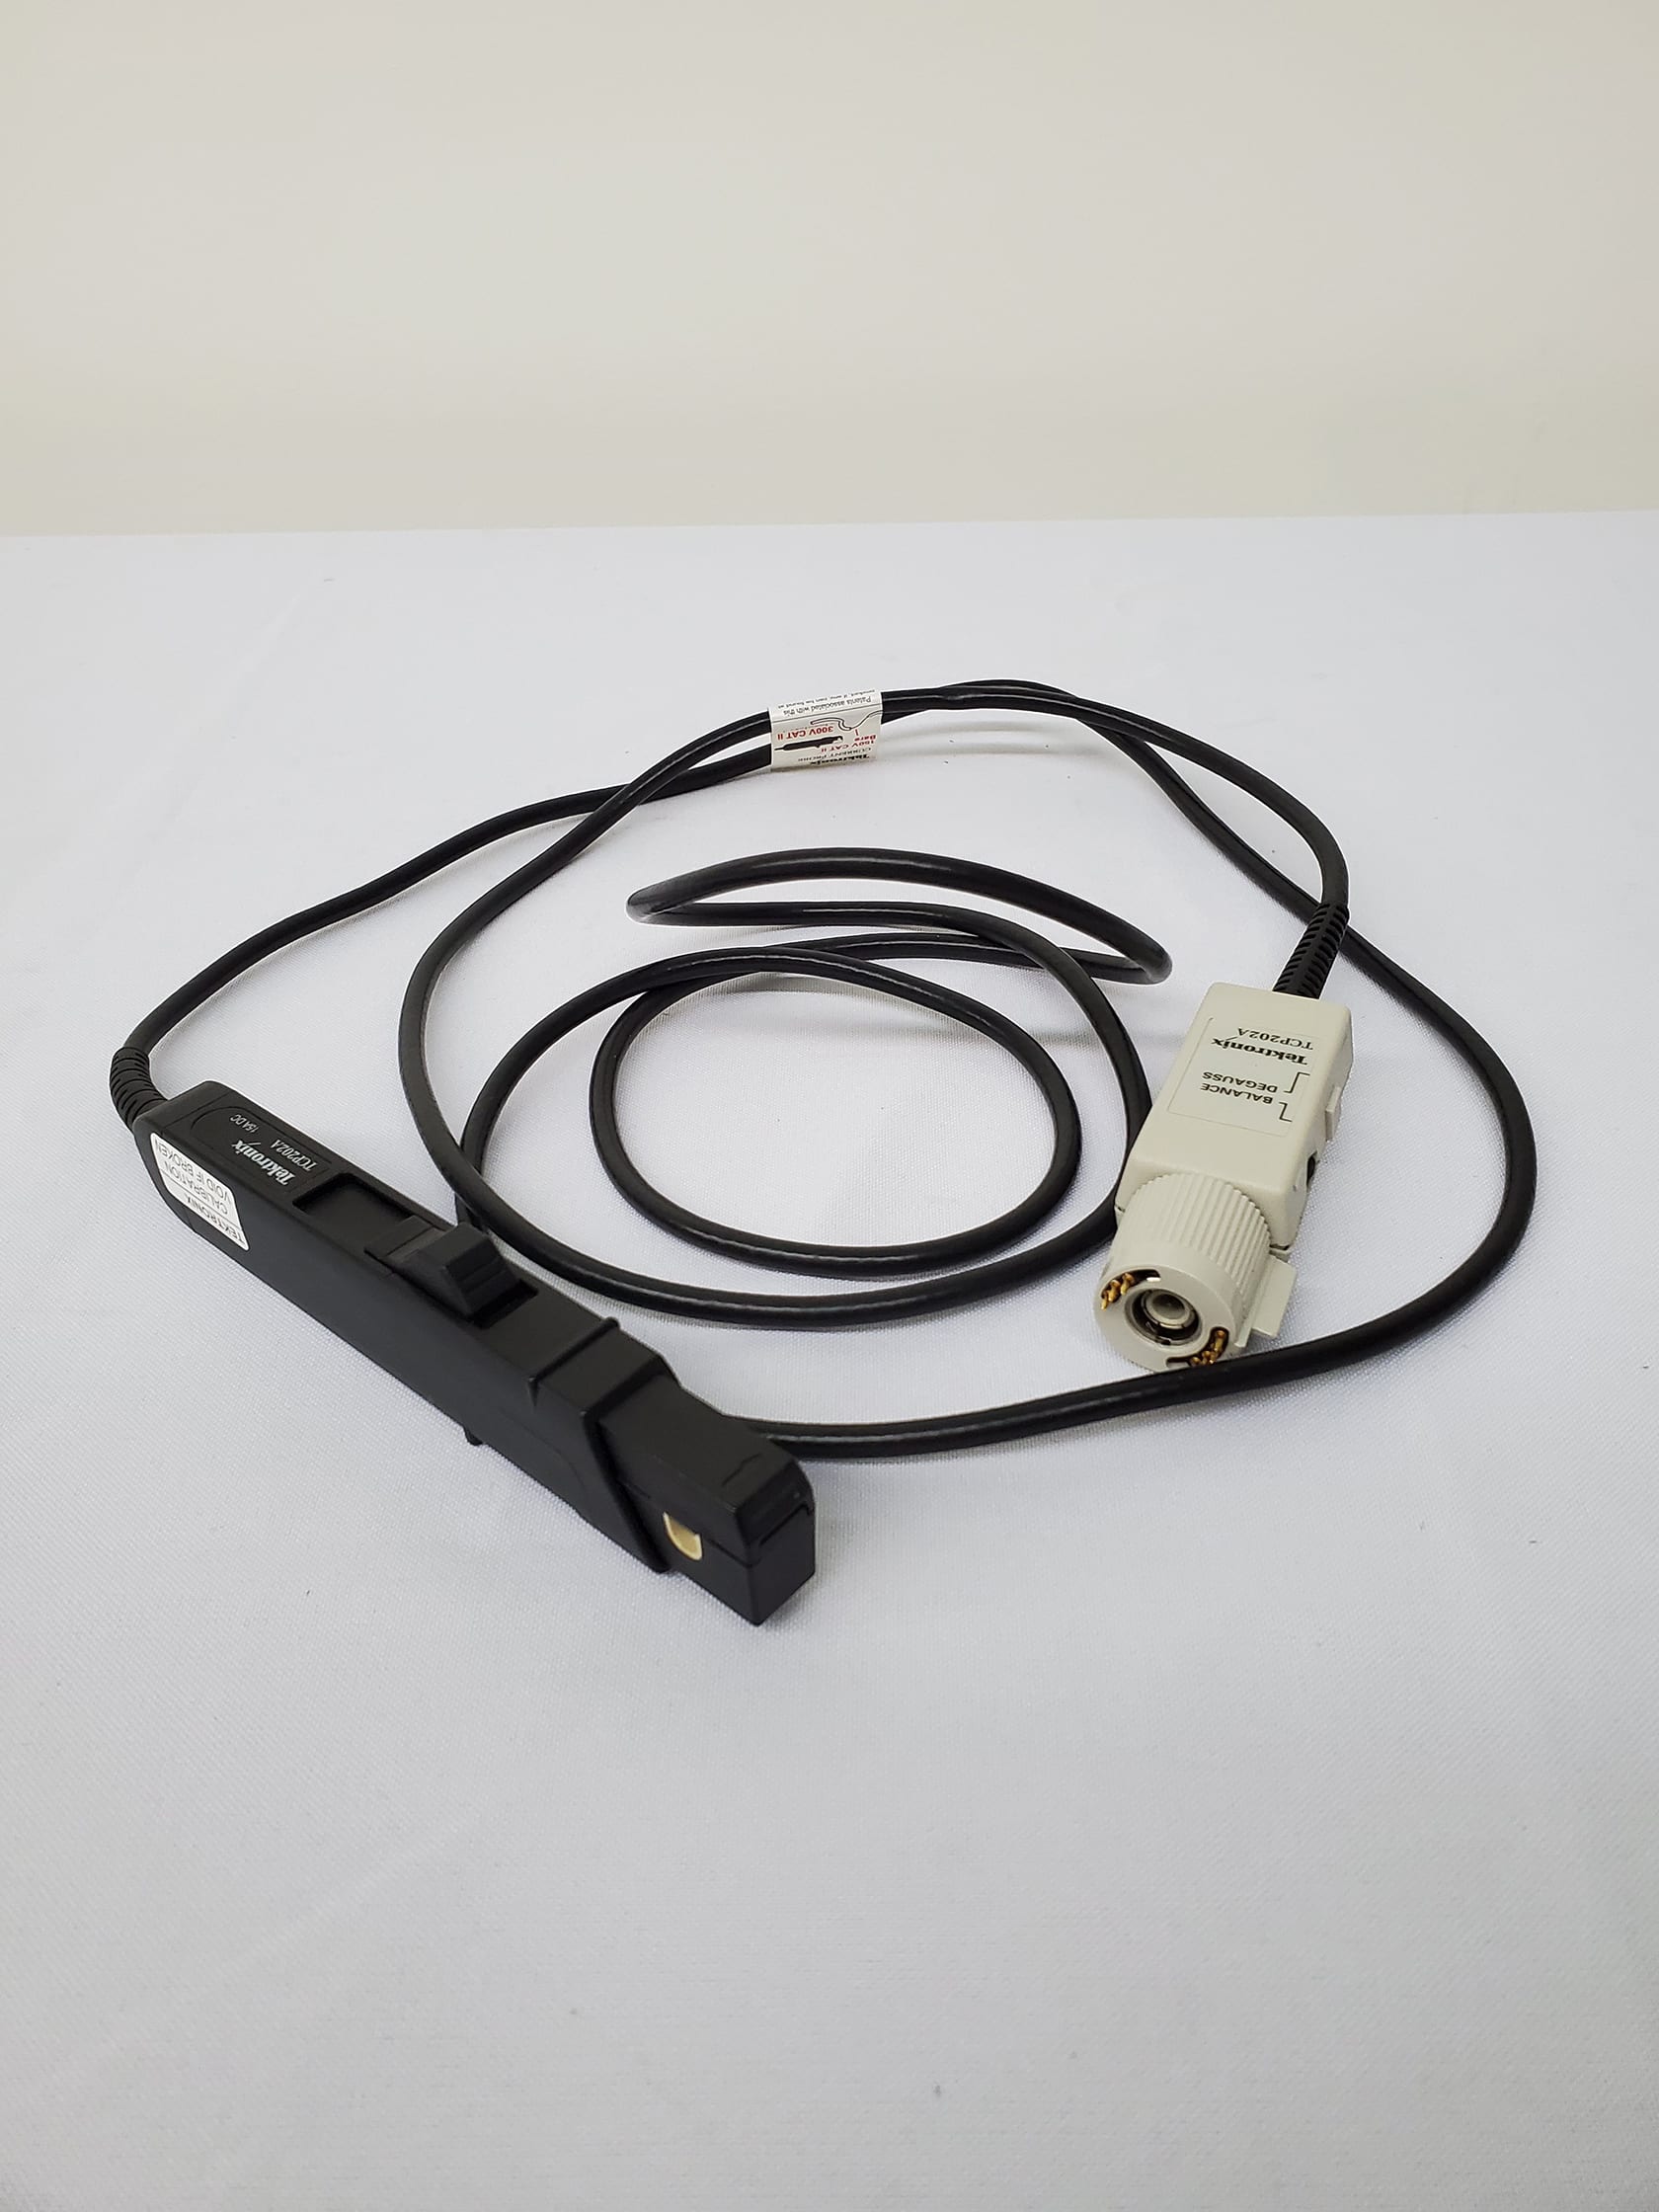 Tektronix TCP 202 A Current Probe For Sale